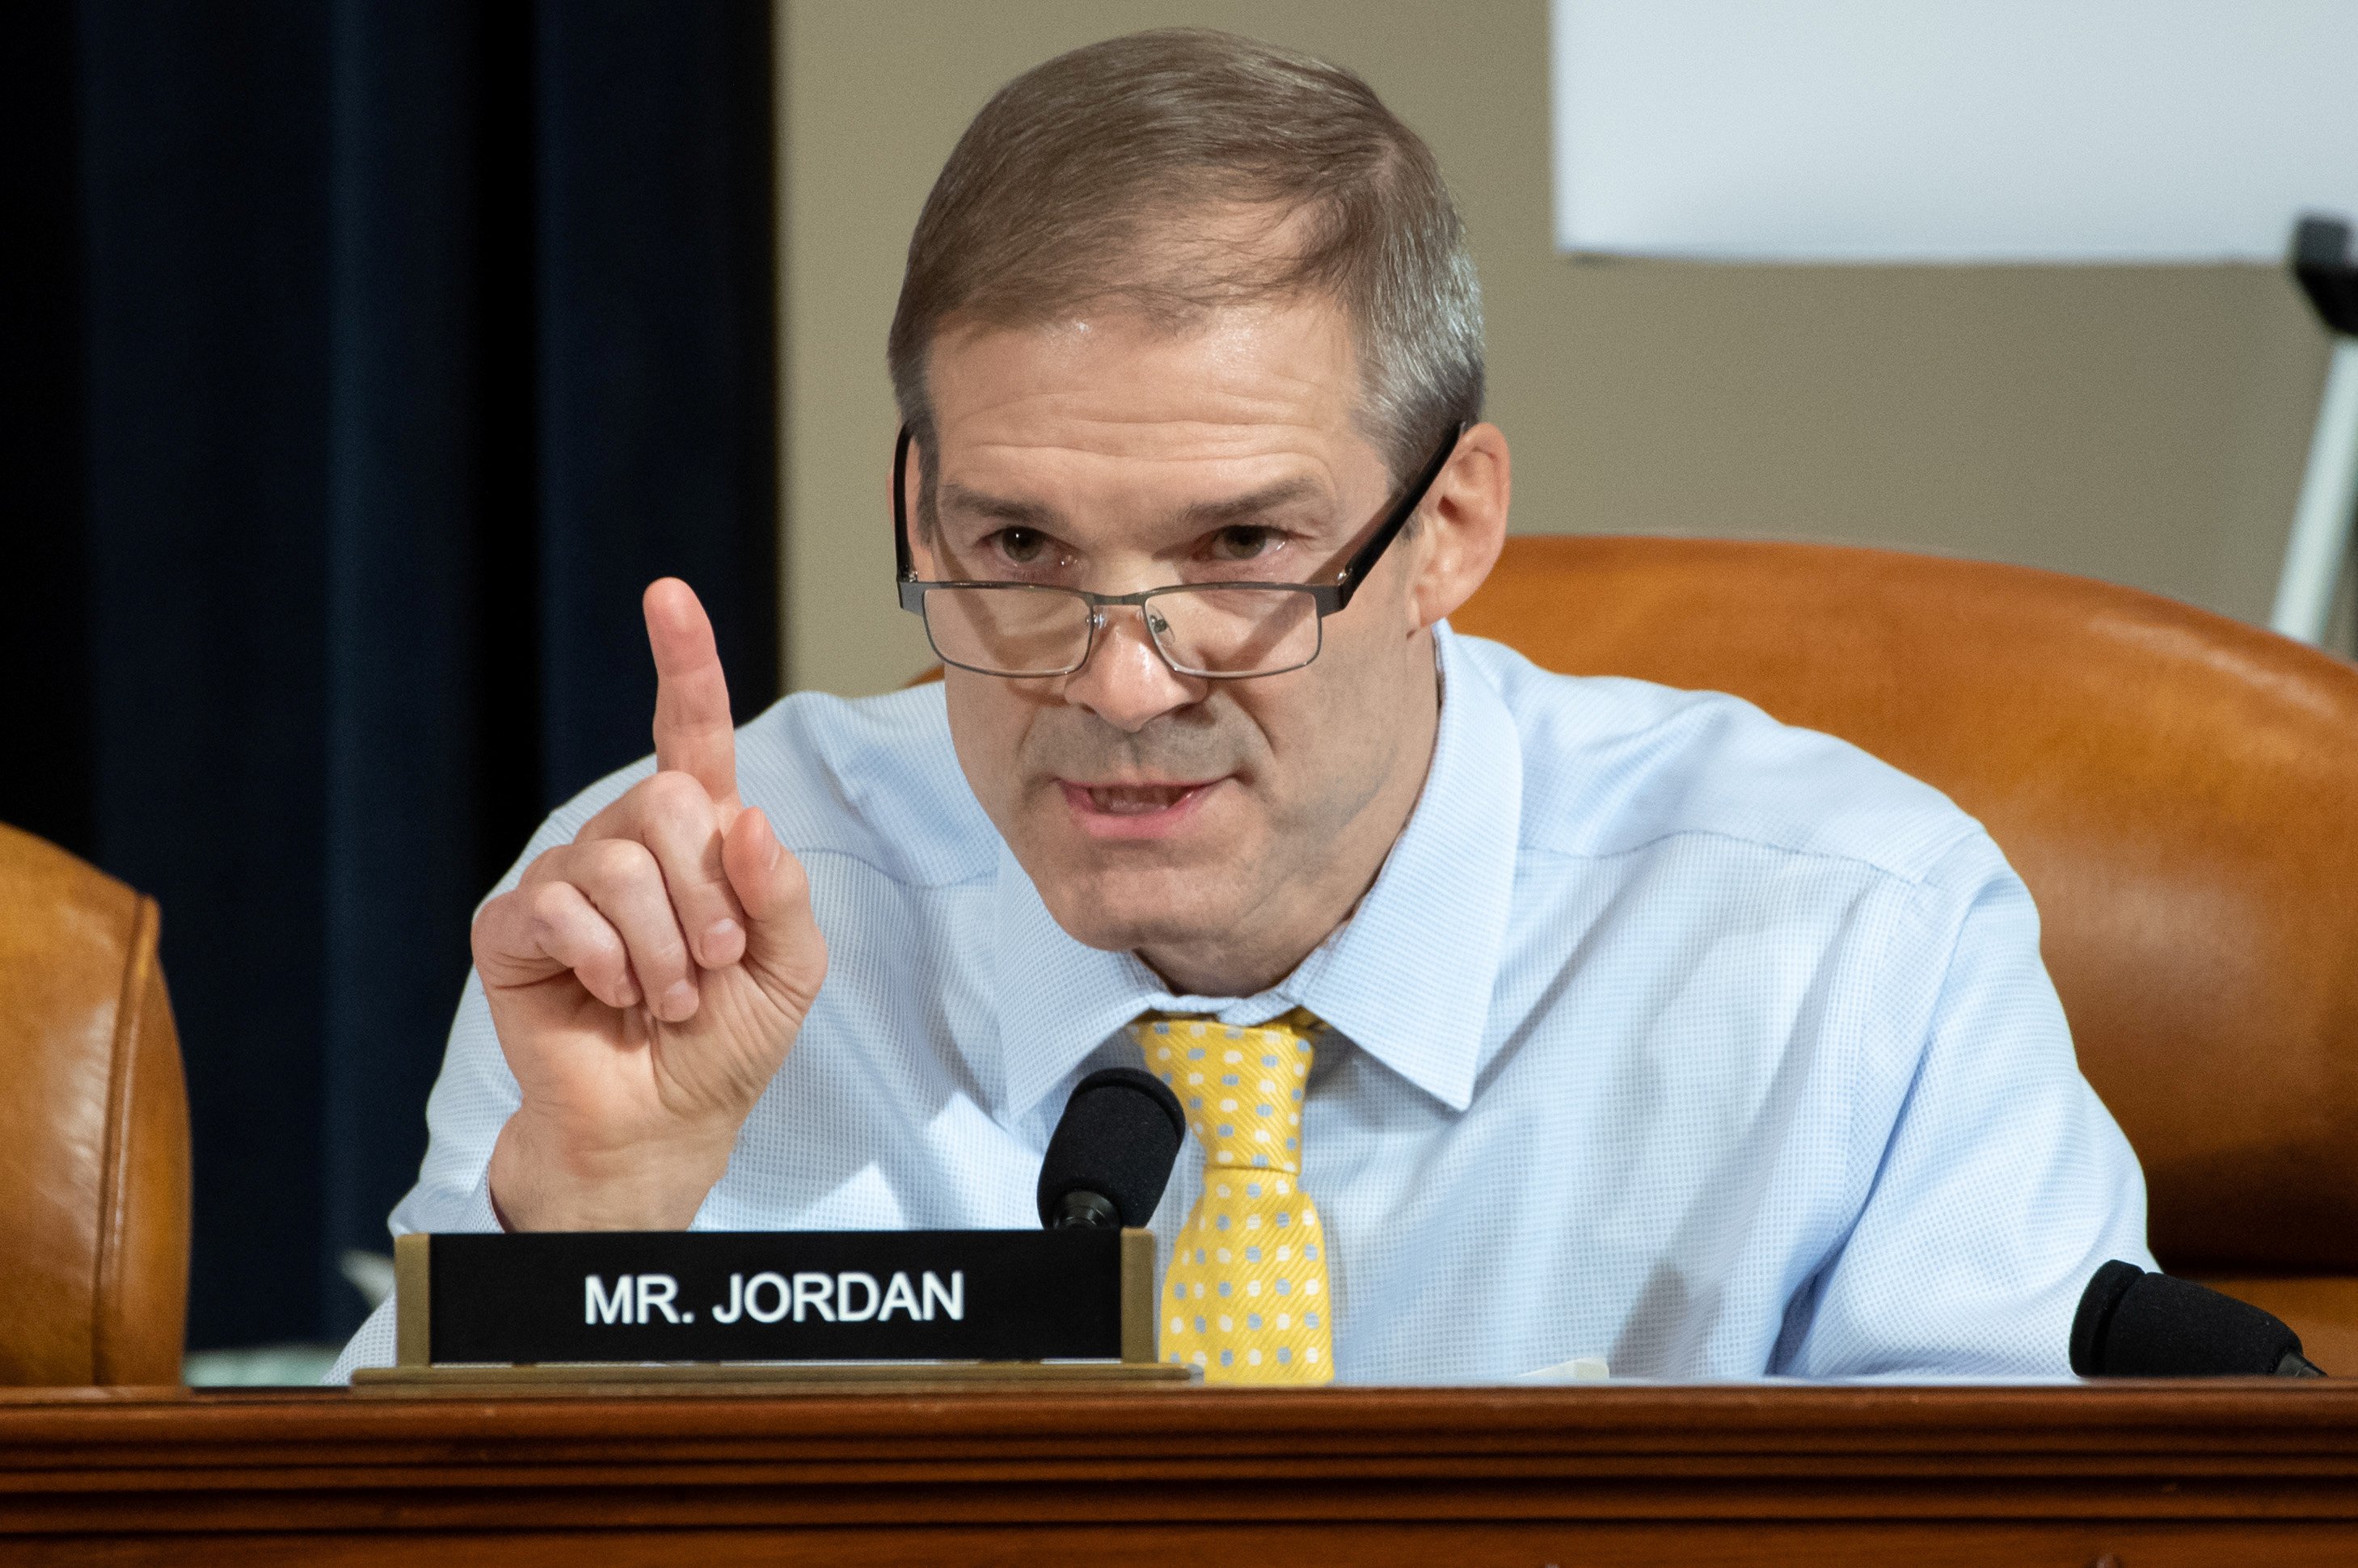 Representative Jim Jordan, Republican of Ohio, asks questions of witnesses U.S. Ambassador to Ukraine William Taylor and Deputy Assistant Secretary George Kent during the first public hearings held by the House Permanent Select Committee on Intelligence as part of the impeachment inquiry into U.S. President Donald Trump, on Capitol Hill in Washington, DC, U.S., November 13, 2019. Saul Loeb/Pool via REUTERS